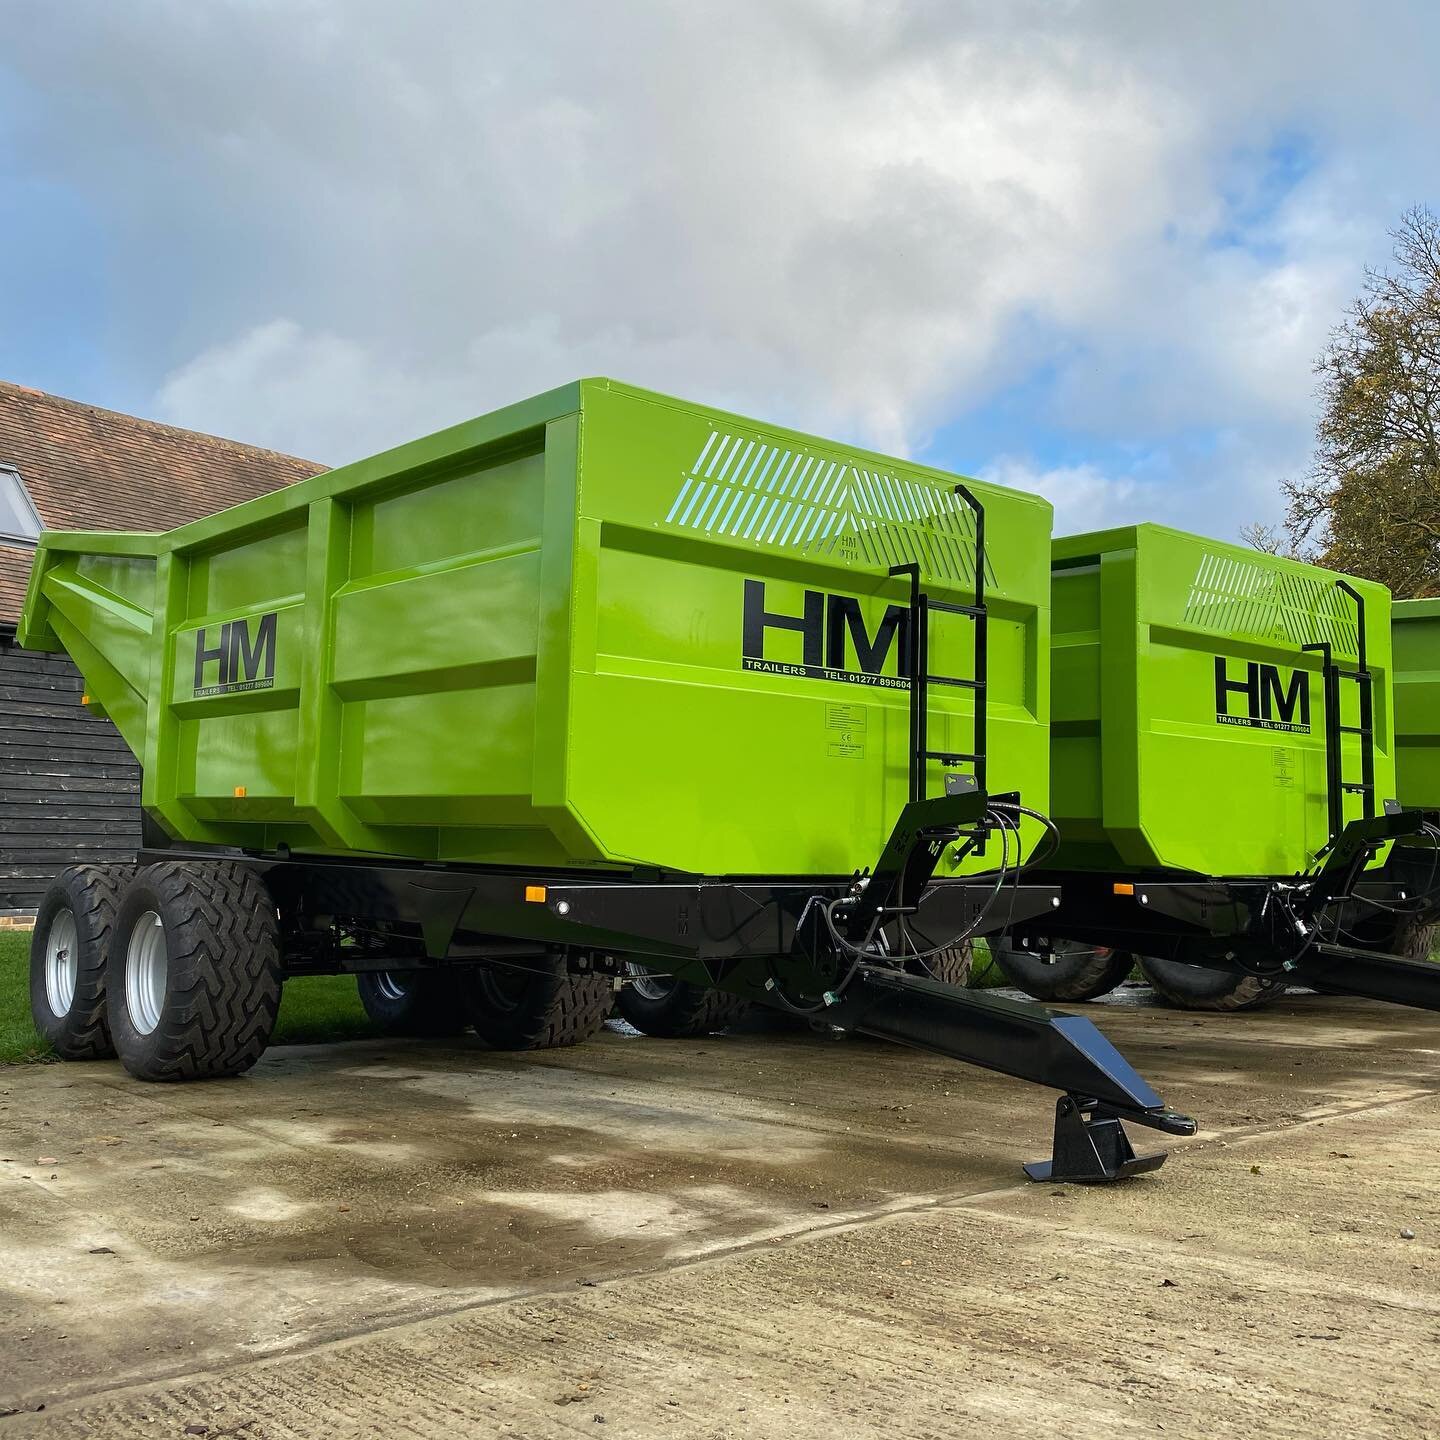 The latest pair of HMDT 14 Agri dump trailers produced here at HM! Ready to be put to work! 

#hmtrailers #agri #agridump #farmtrailer #britishfarming #britishagriculture #agriculture #farminguk #farminglife